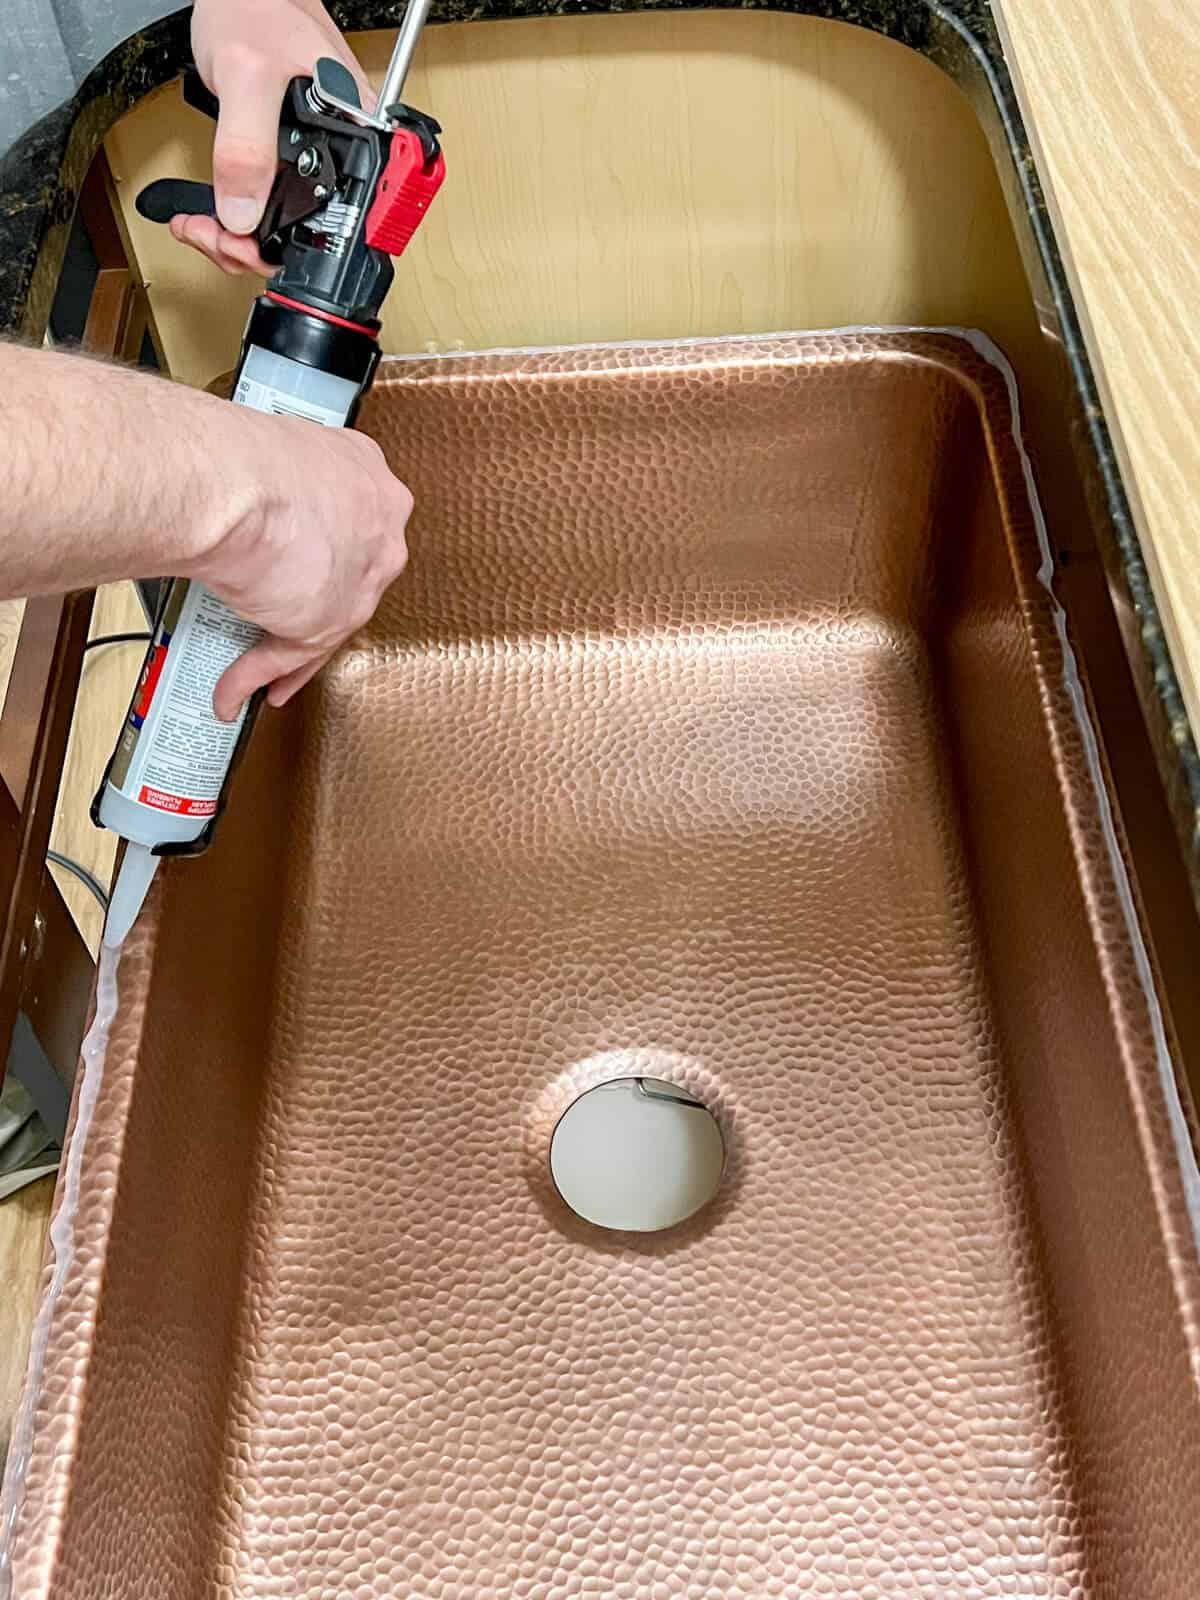 applying silicone caulk to the edge of an undermount kitchen sink for installation